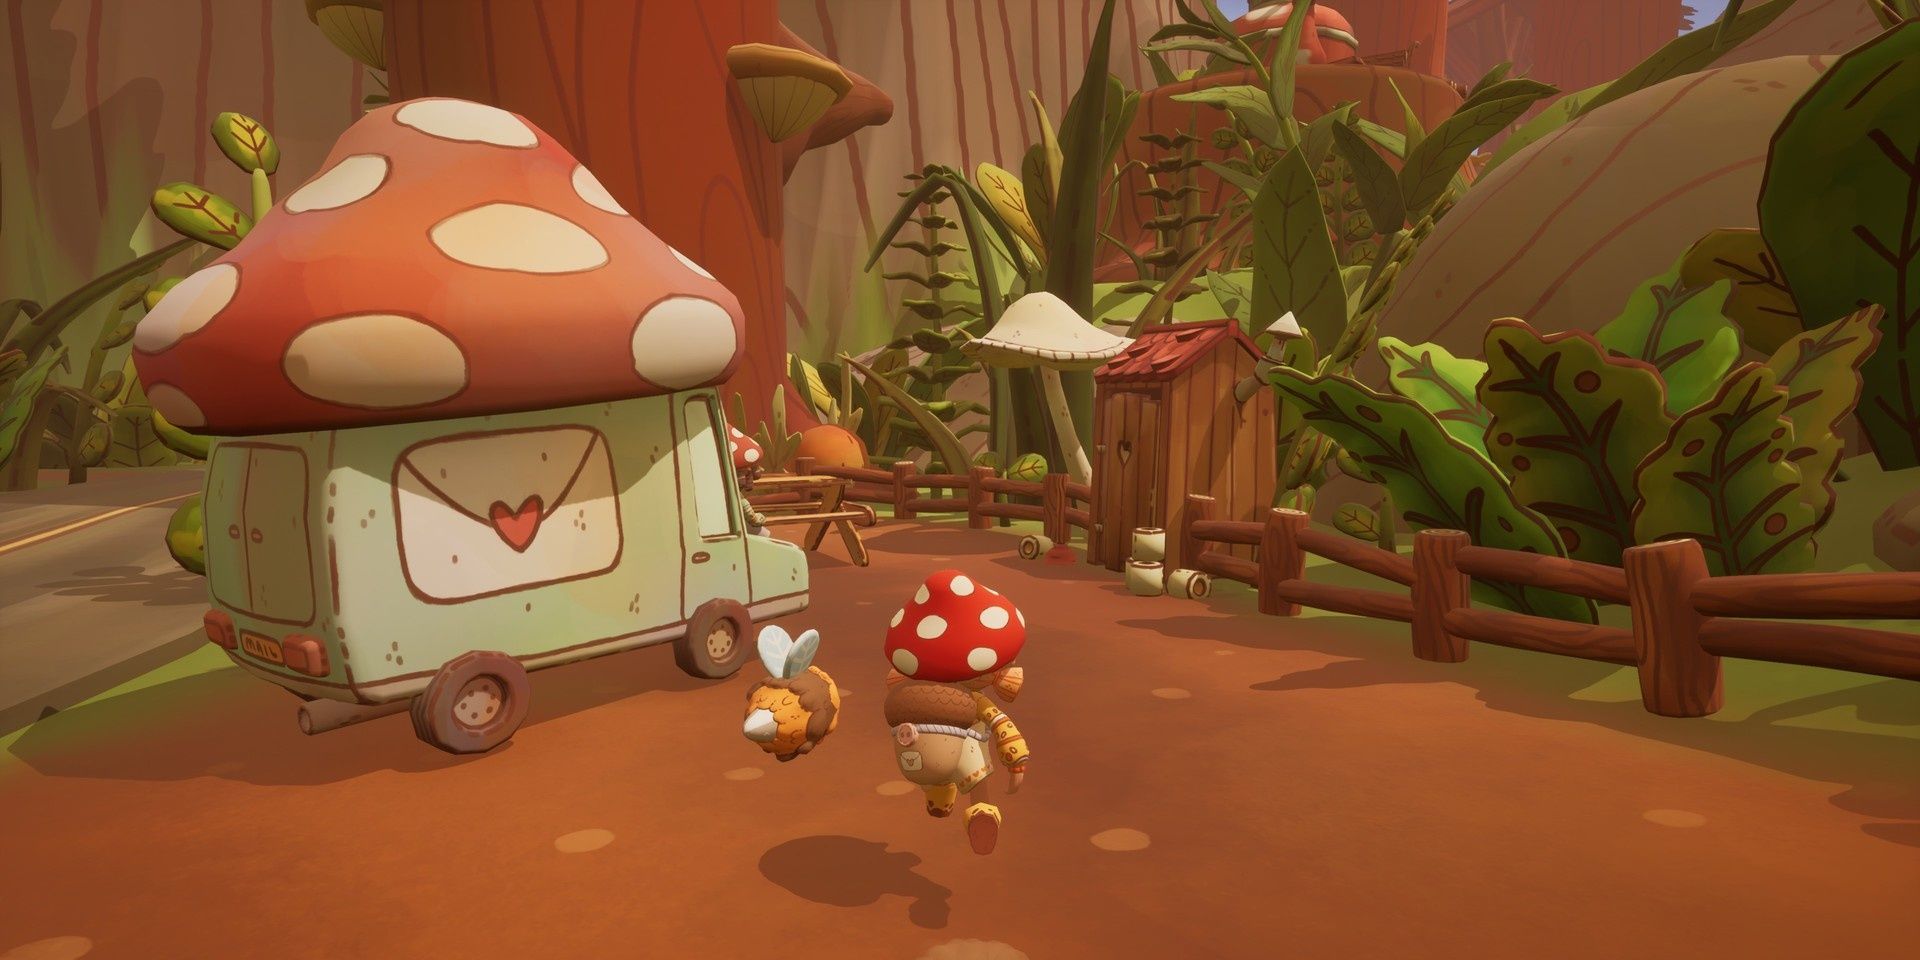 The mail scout and their bee going towards a mail truck that has a mushroom on its top in Mail Time